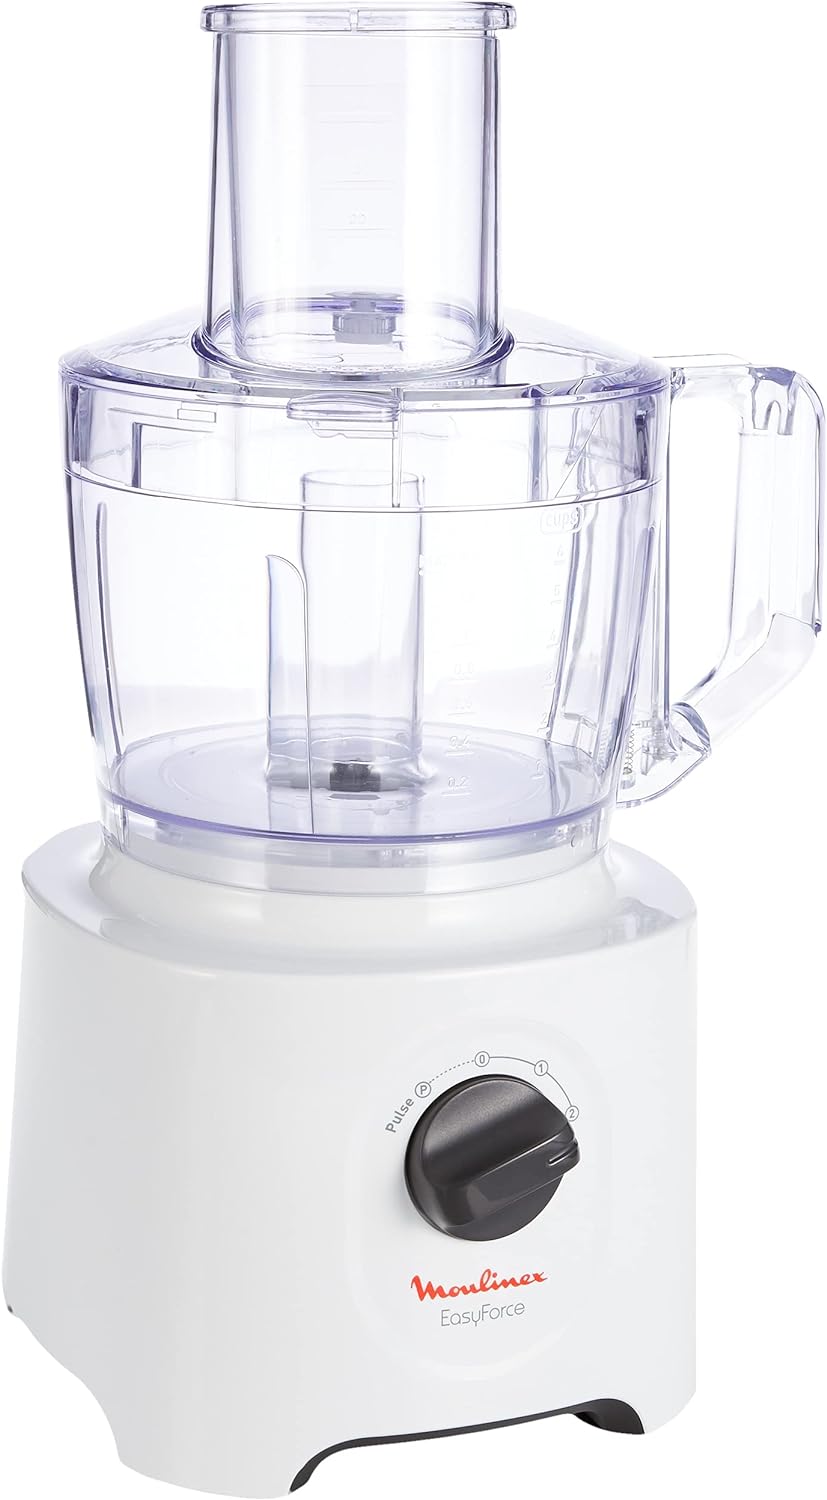 Moulinex Easy Force Food Processor, 800 Watts, 6 Attachments, White, Fp247127, min 2 yrs warranty